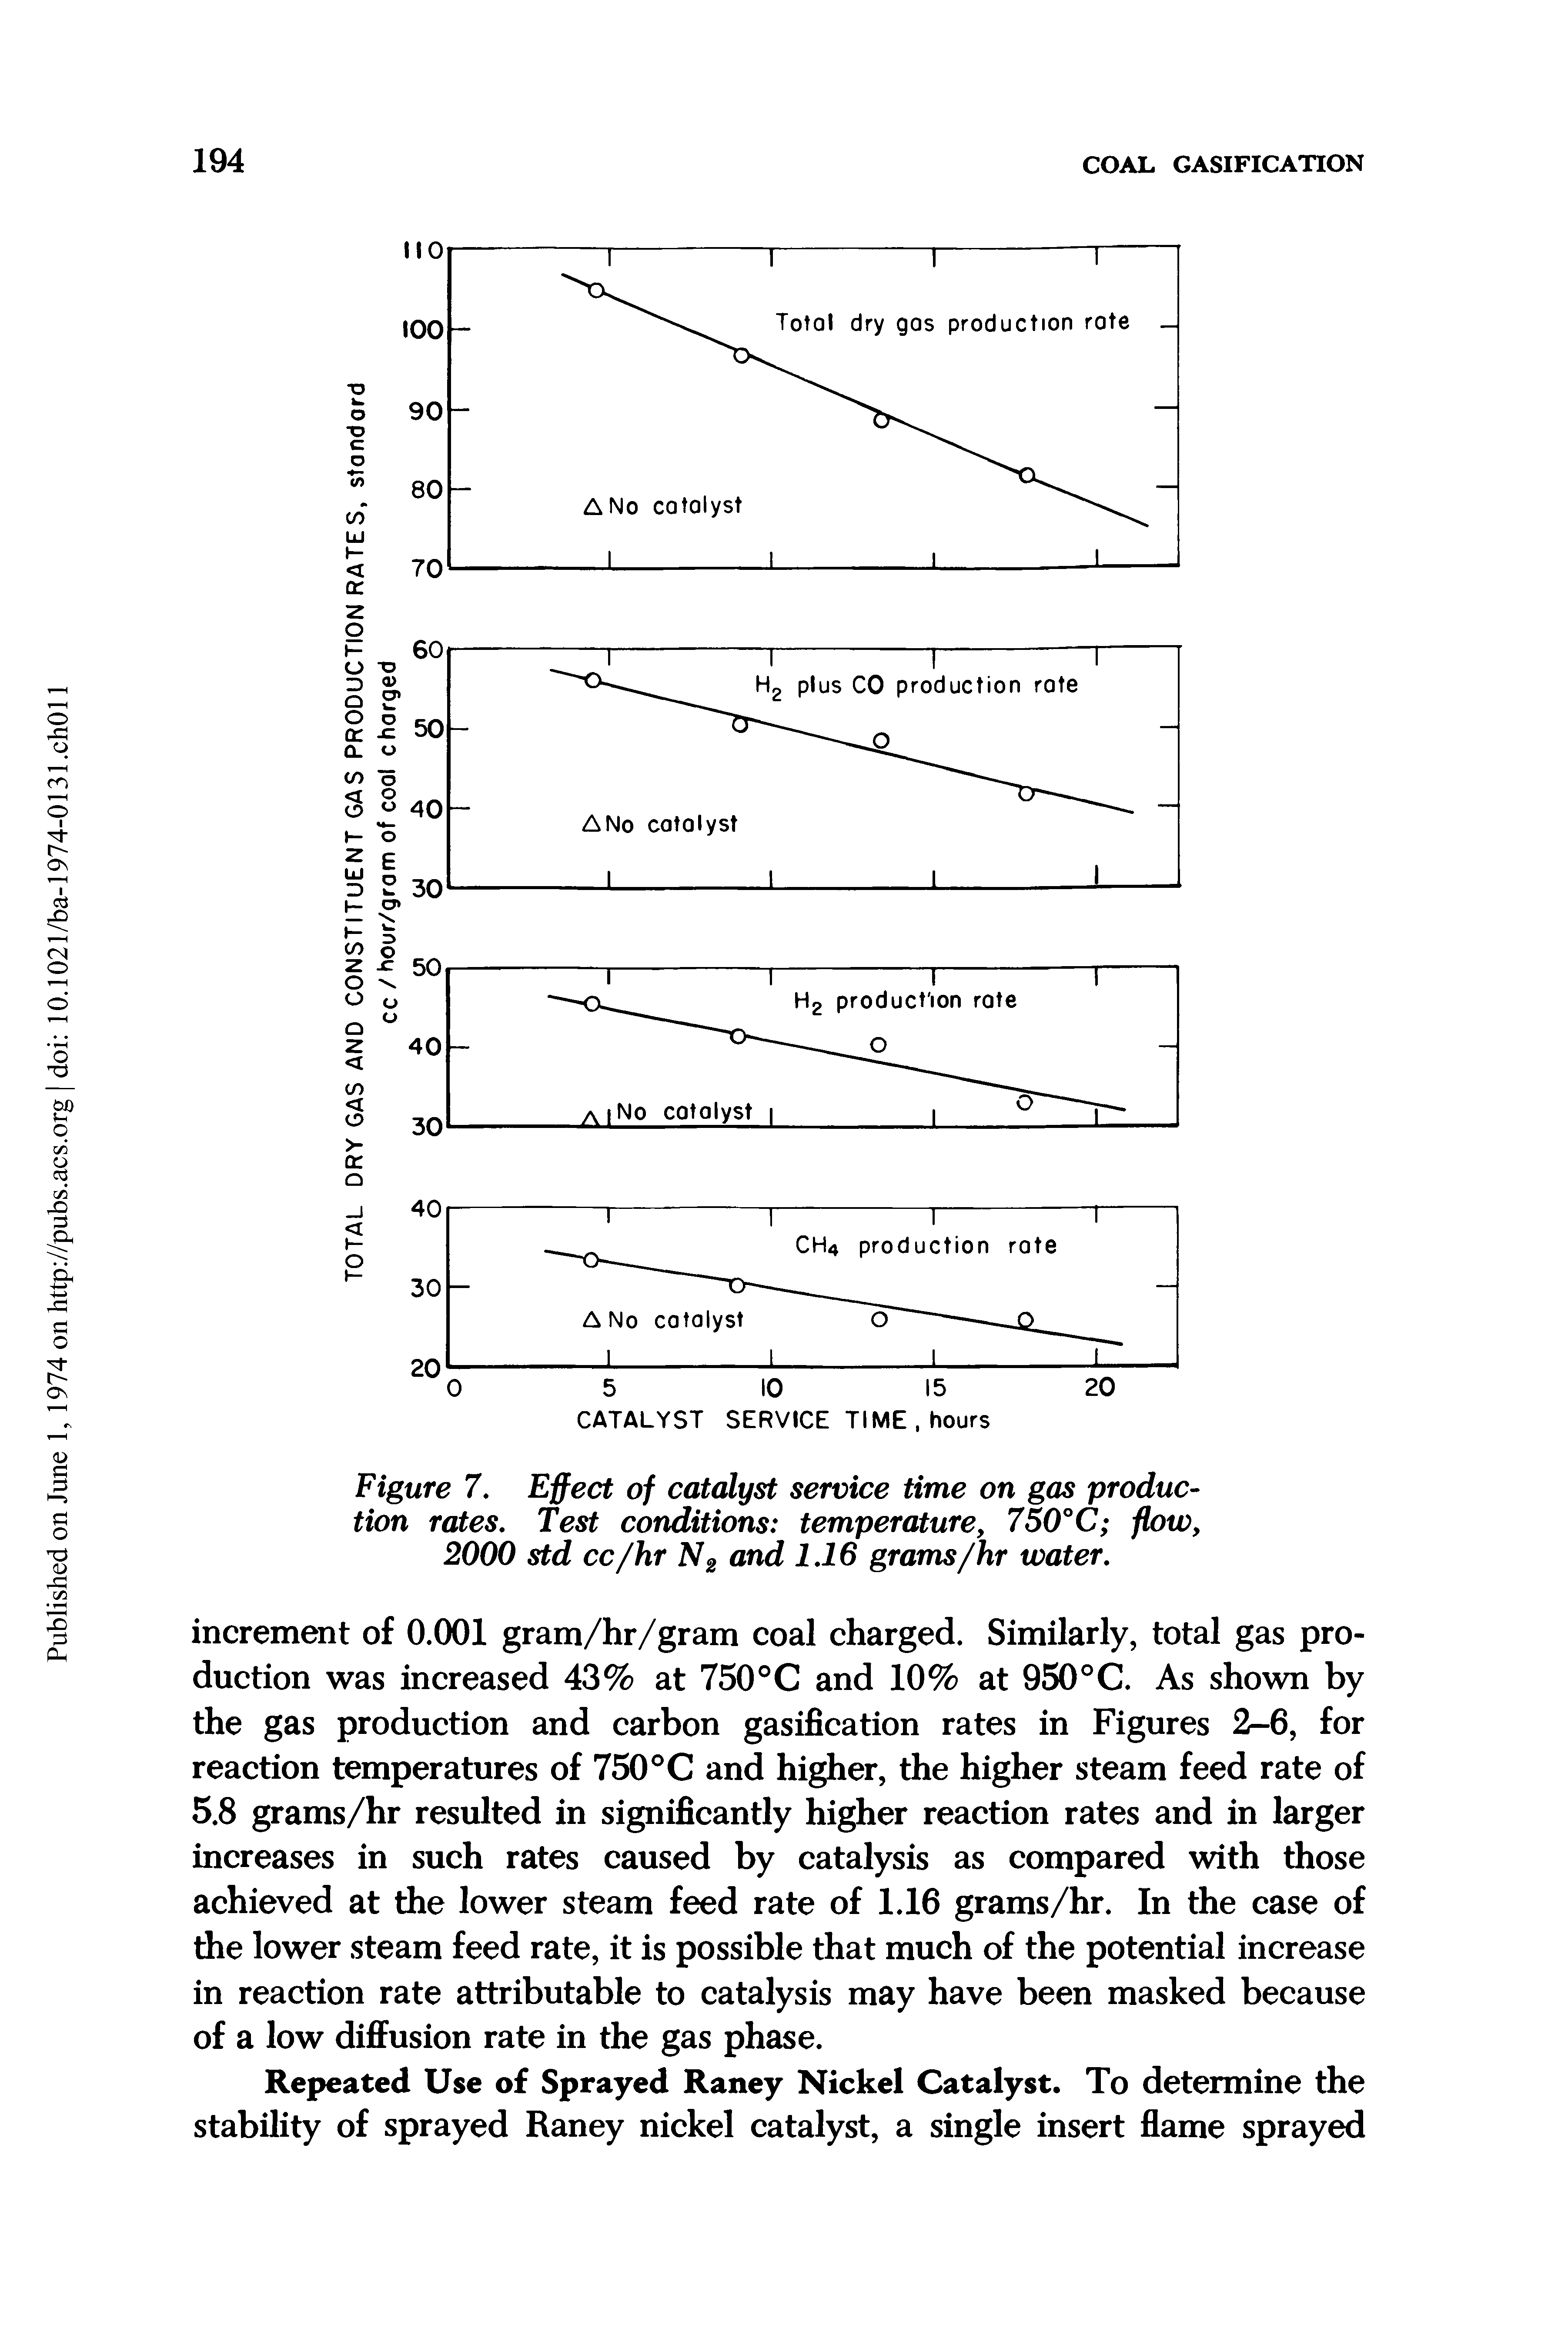 Figure 7. Effect of catalyst service time on gas production rates. Test conditions temperature, 750°C flow, 2000 std cc/hr N2 and 1.16 grams/hr water.